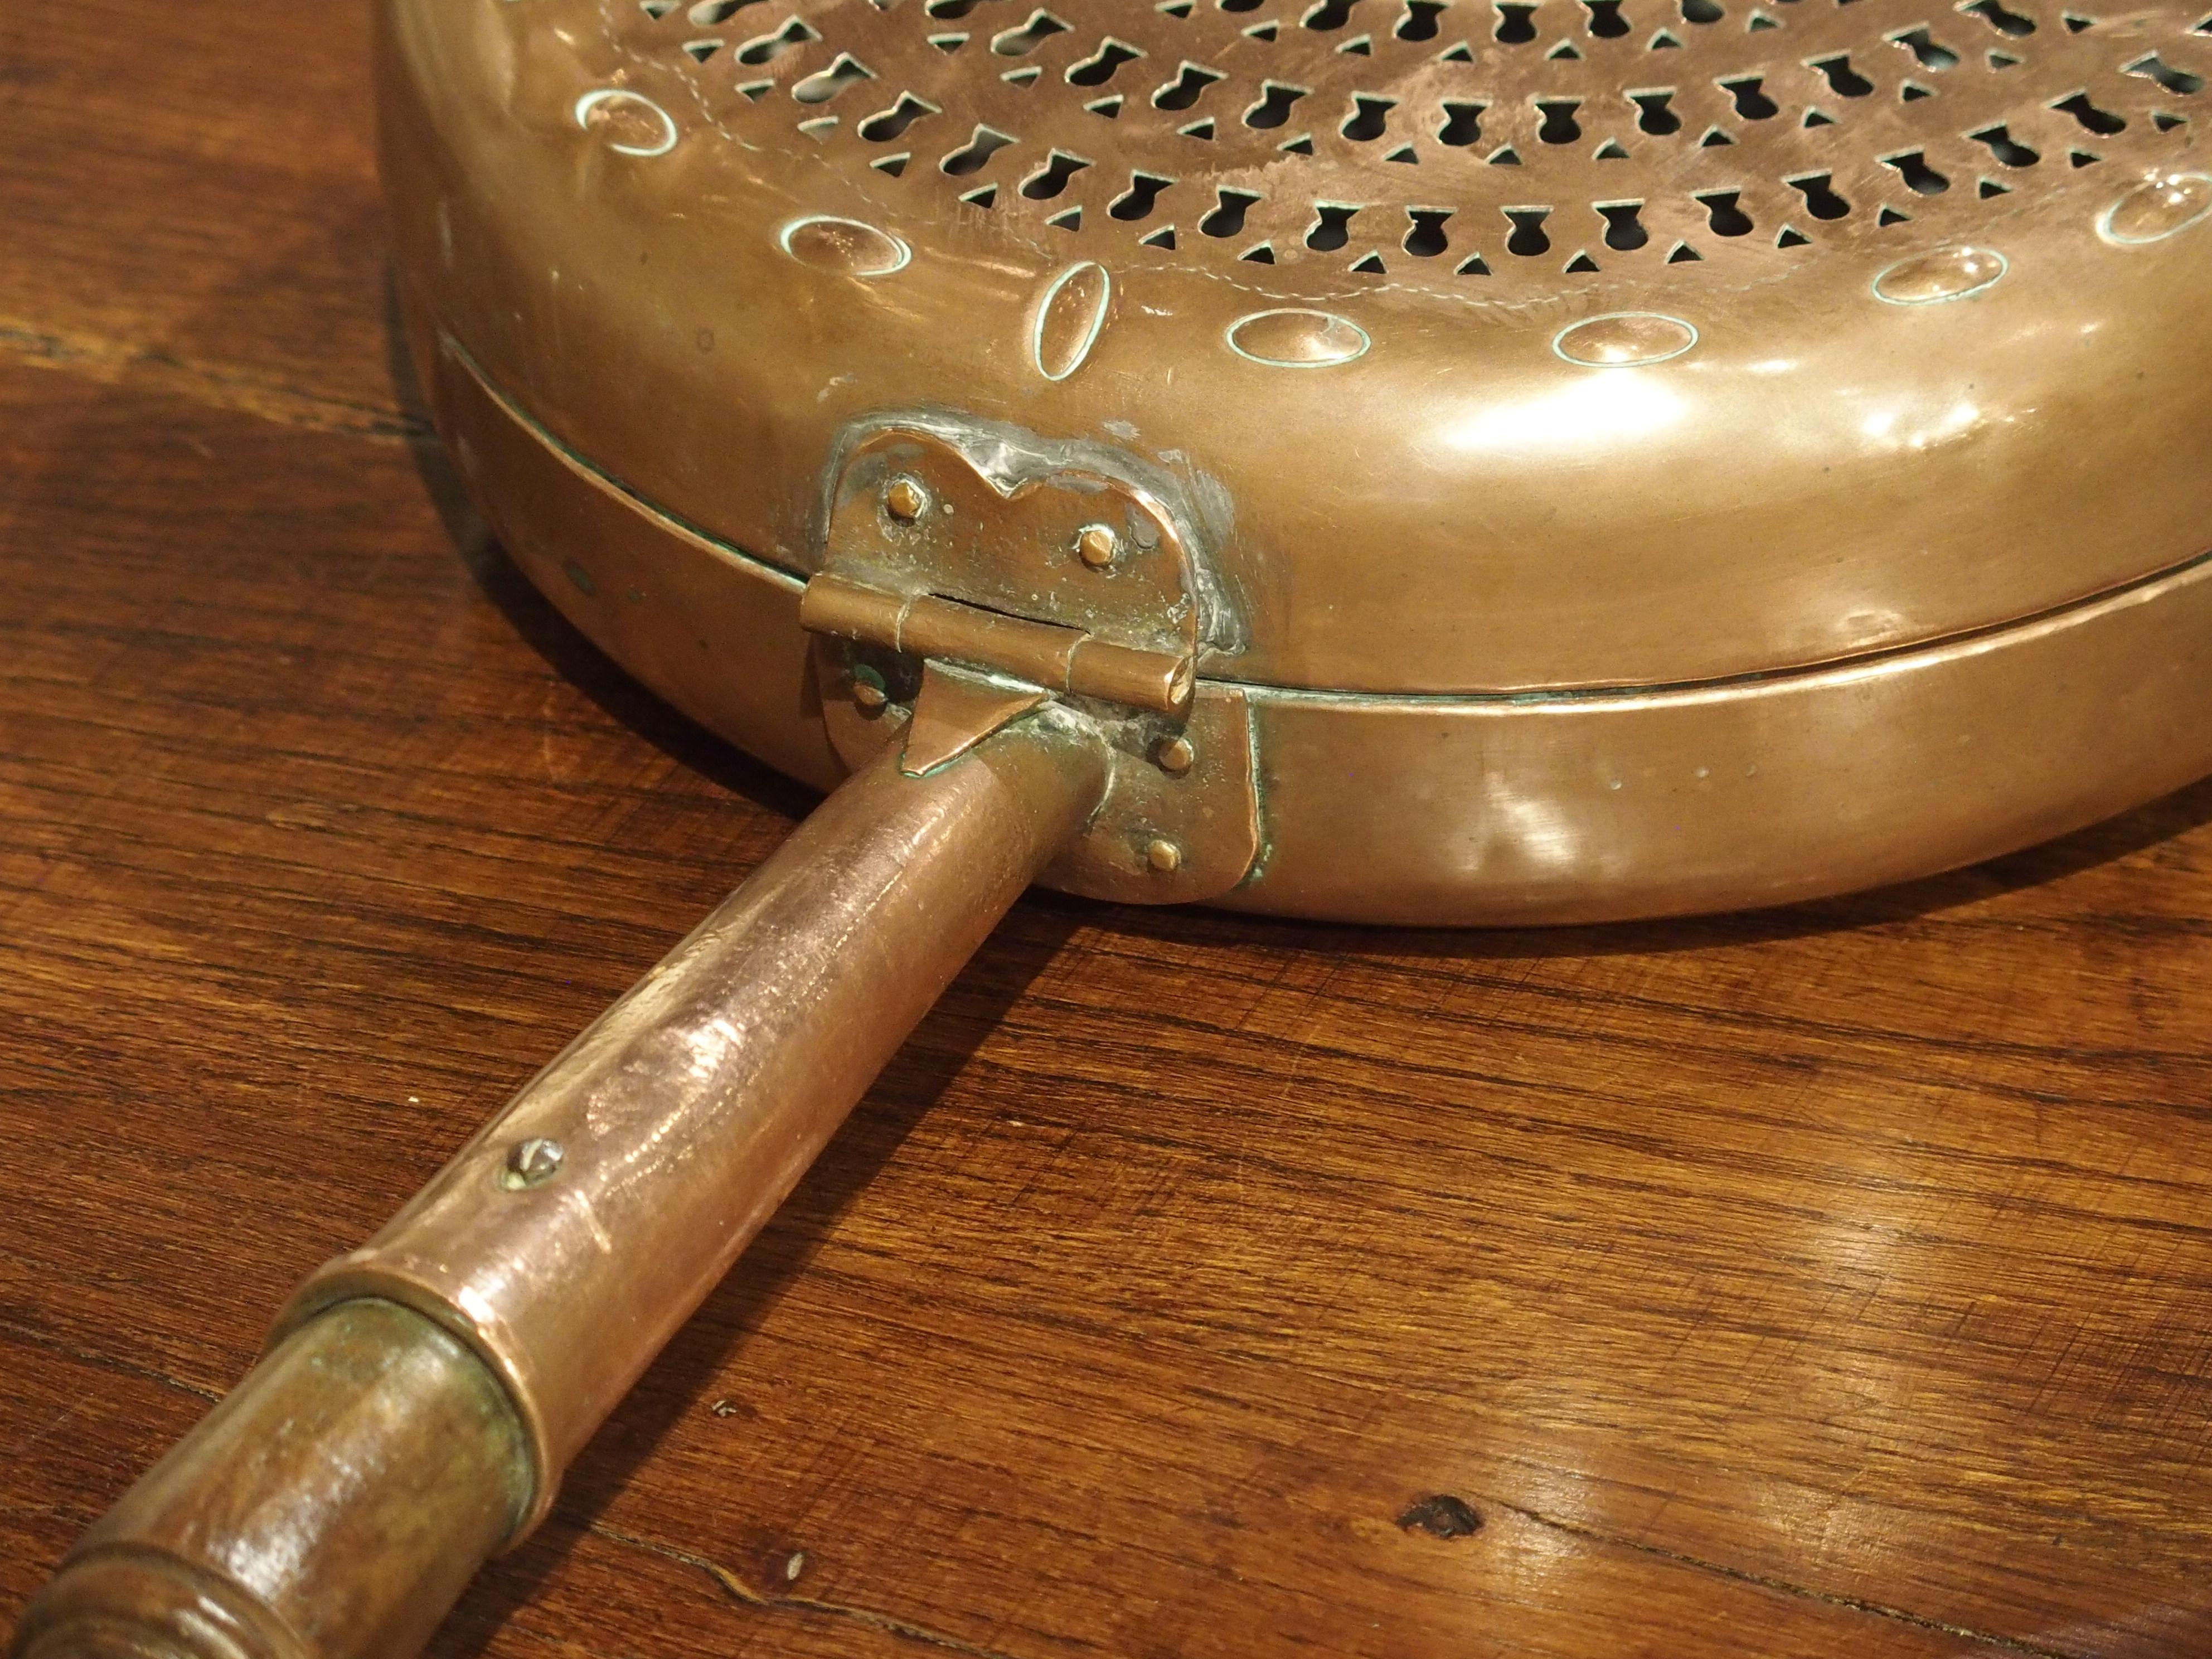 This interesting copper bassinoire with turned wood handle is from the 1700’s. A bassinoire is an old French instrument used to heat a bed. A hot material, such as coals or embers, would be placed into a metal receptacle. Copper was the preferred